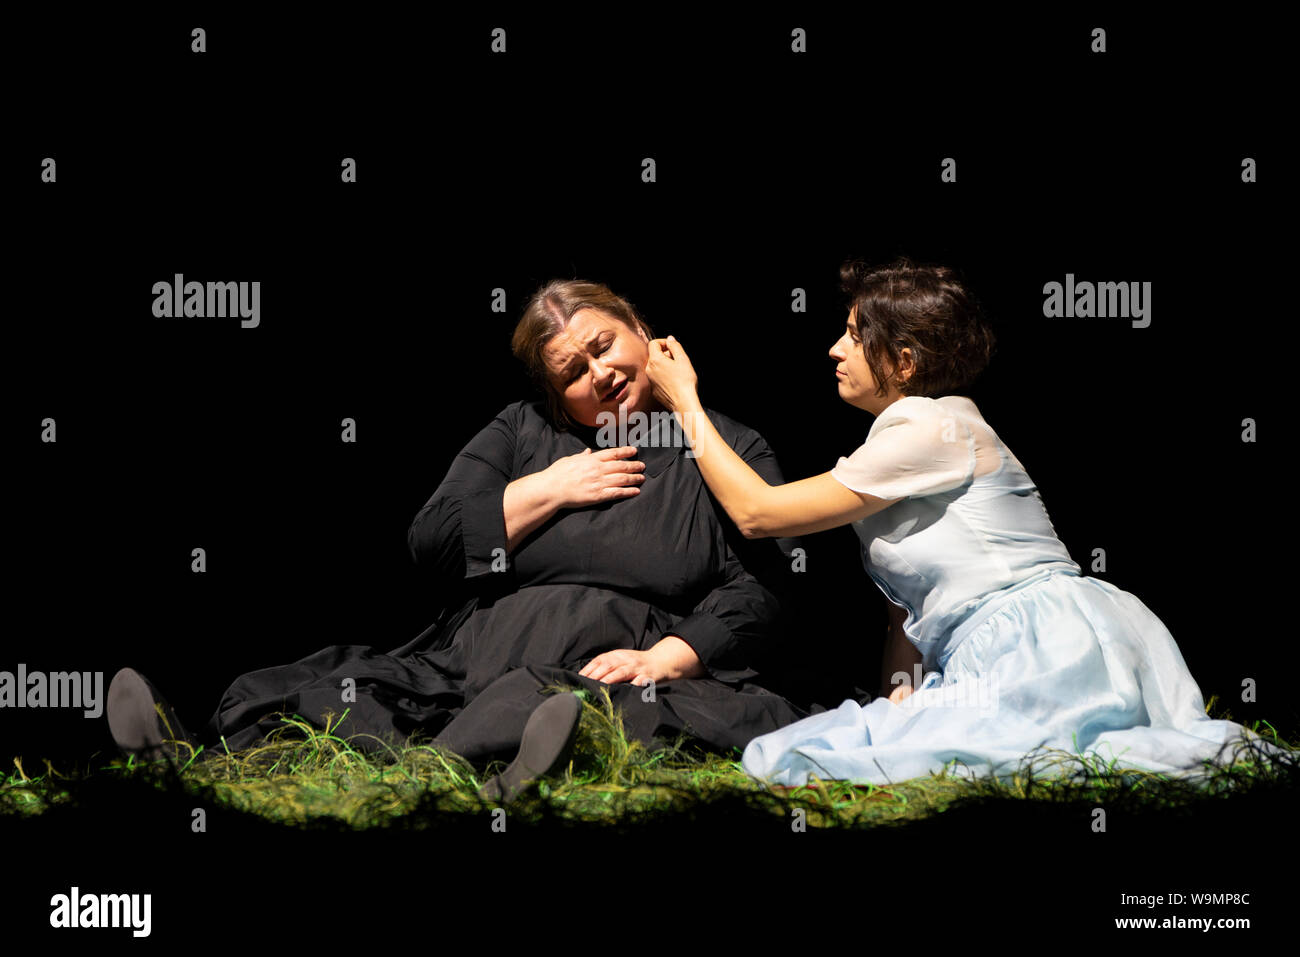 Edinburgh, Scotland, UK. 14th Aug, 2019. Preview performance of Tchaikovsky's opera Eugene Onegin by the Komische Oper Berlin in the Festival Theatre as part of the Edinburgh International Festival. Komische Oper Berlin return to the International Festival for Tchaikovsky's best-loved opera, based on Alexander Pushkin's classic verse novel. Tchaikovsky's heart-breaking love story uses the author's poetry to create lyrical scenes that contrast the austerities of country life with the excesses and opulence of the Russian imperial court. Credit: Iain Masterton/Alamy Live News Stock Photo